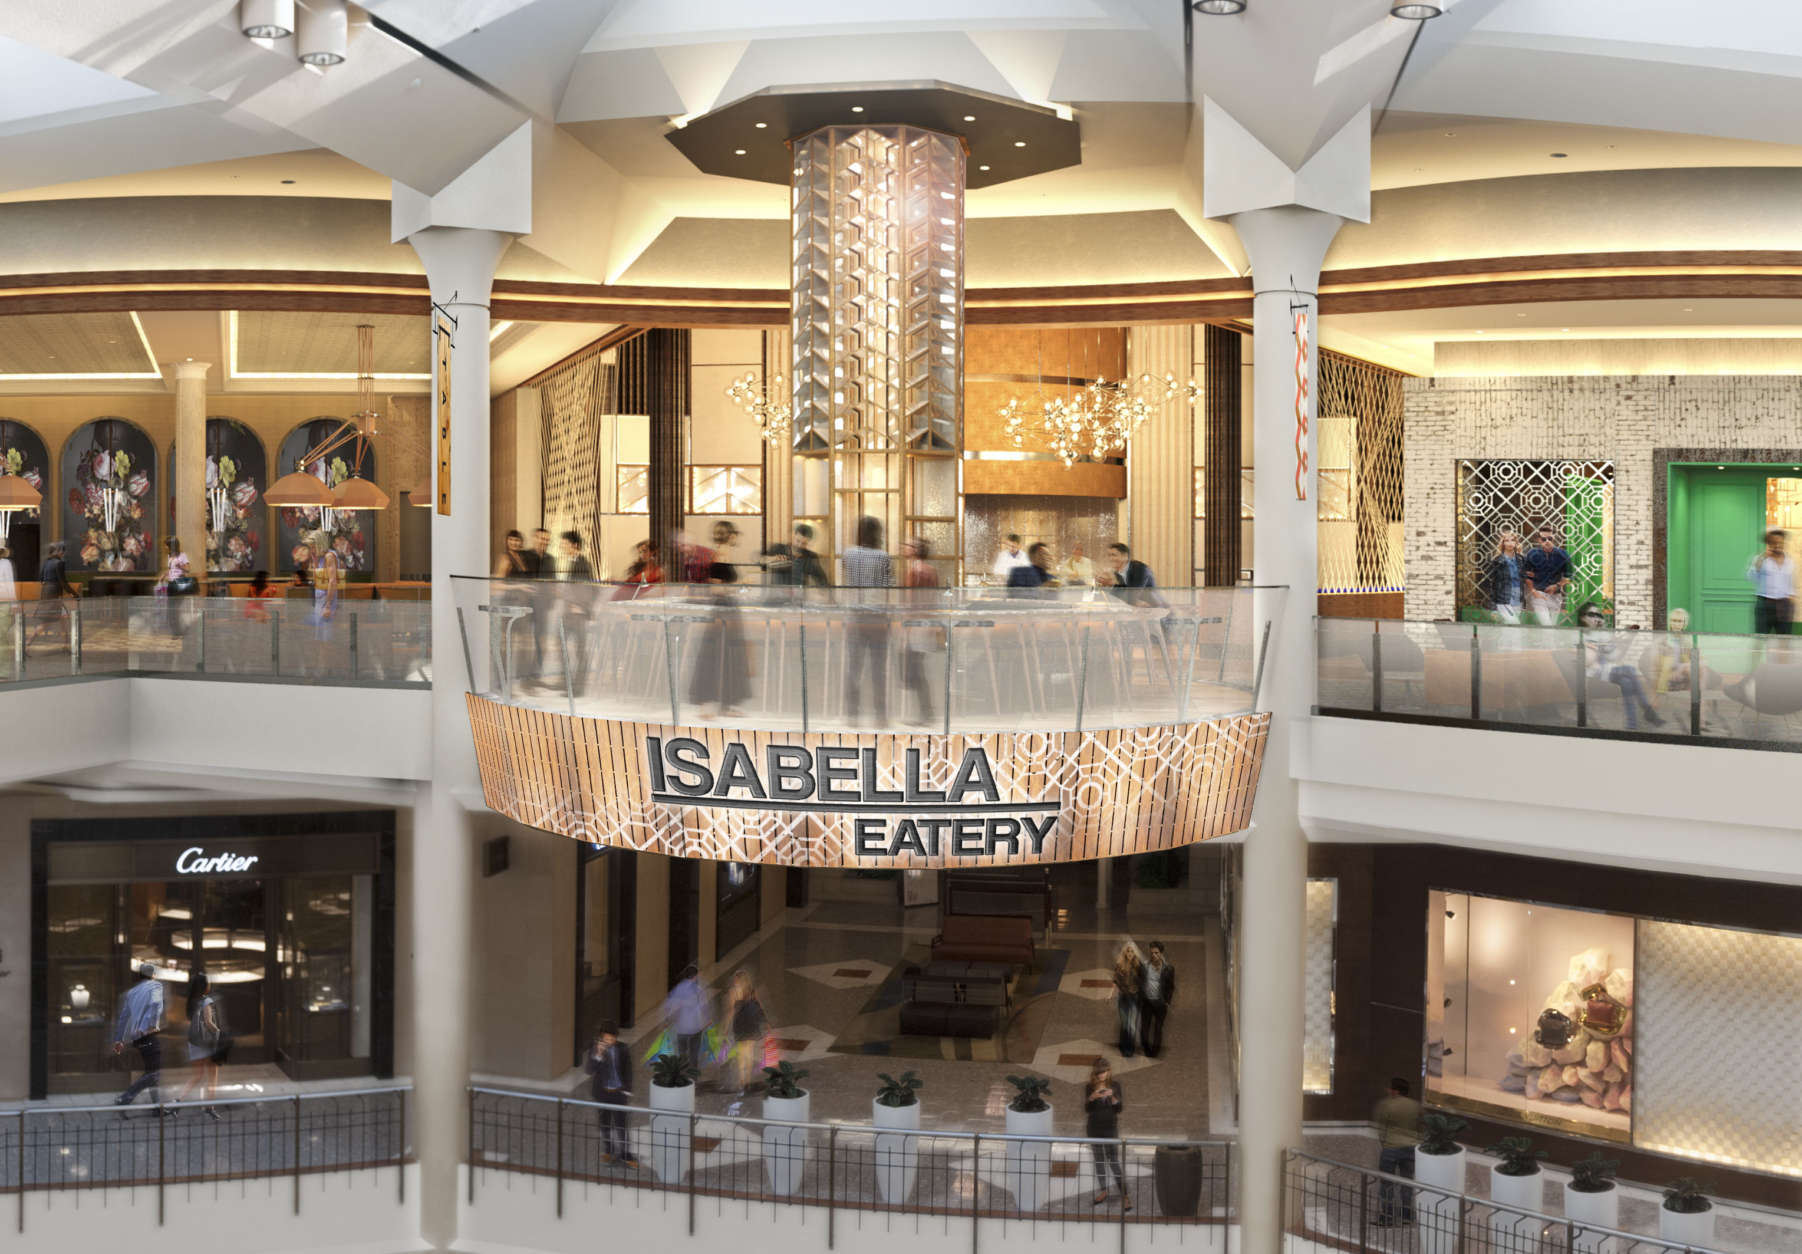 Isabella Eatery is the largest project that the former “Top Chef” standout has ever taken on. (Rendering courtesy Mike Isabella Concepts/Streetsense)